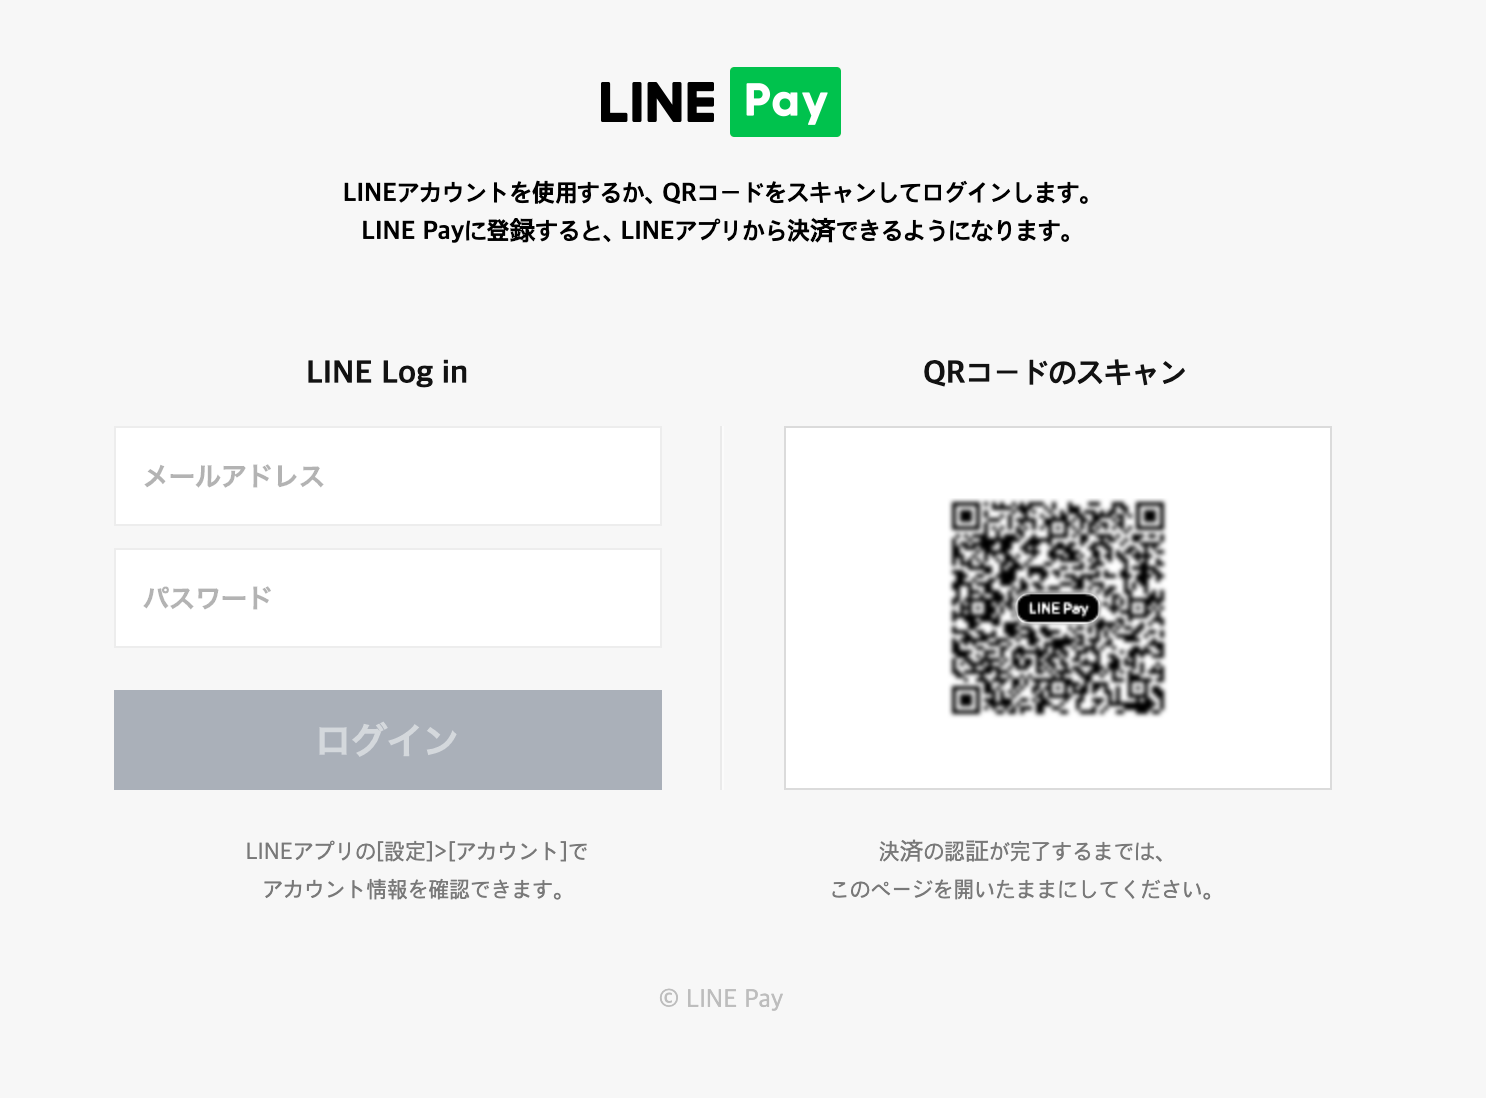 linepay-news03.png